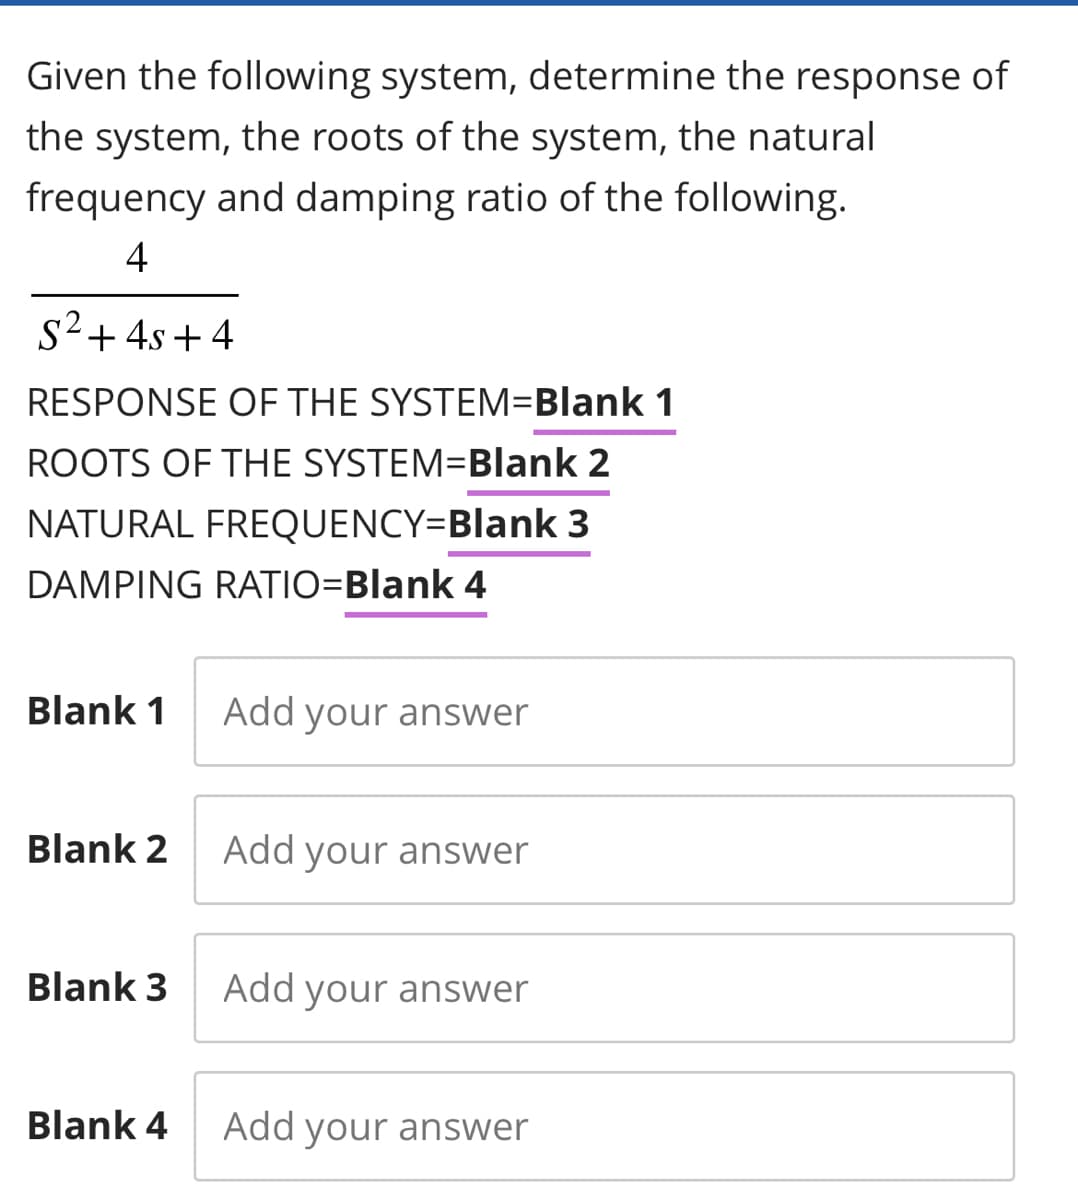 Given the following system, determine the response of
the system, the roots of the system, the natural
frequency and damping ratio of the following.
4
S² + 4s+4
RESPONSE OF THE SYSTEM=Blank 1
ROOTS OF THE SYSTEM=Blank 2
NATURAL FREQUENCY=Blank 3
DAMPING RATIO=Blank 4
Blank 1
Blank 2
Blank 3
Blank 4
Add your answer
Add your answer
Add your answer
Add your answer